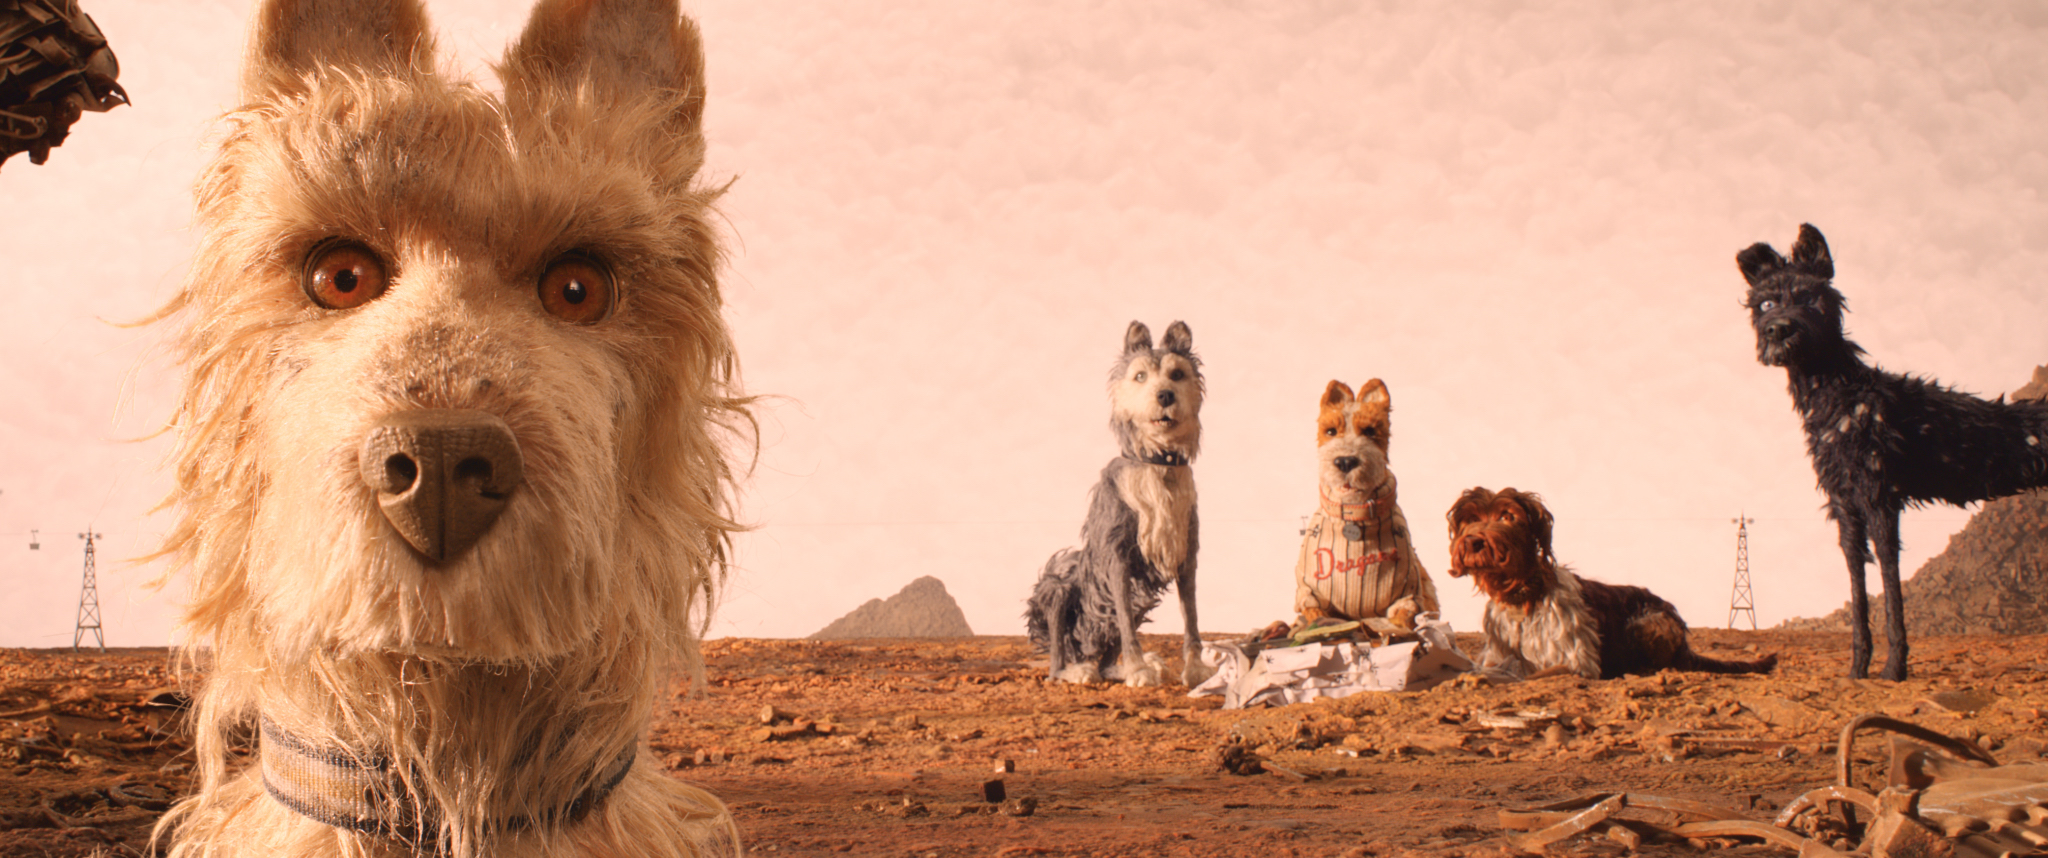 Still from Isle of Dogs